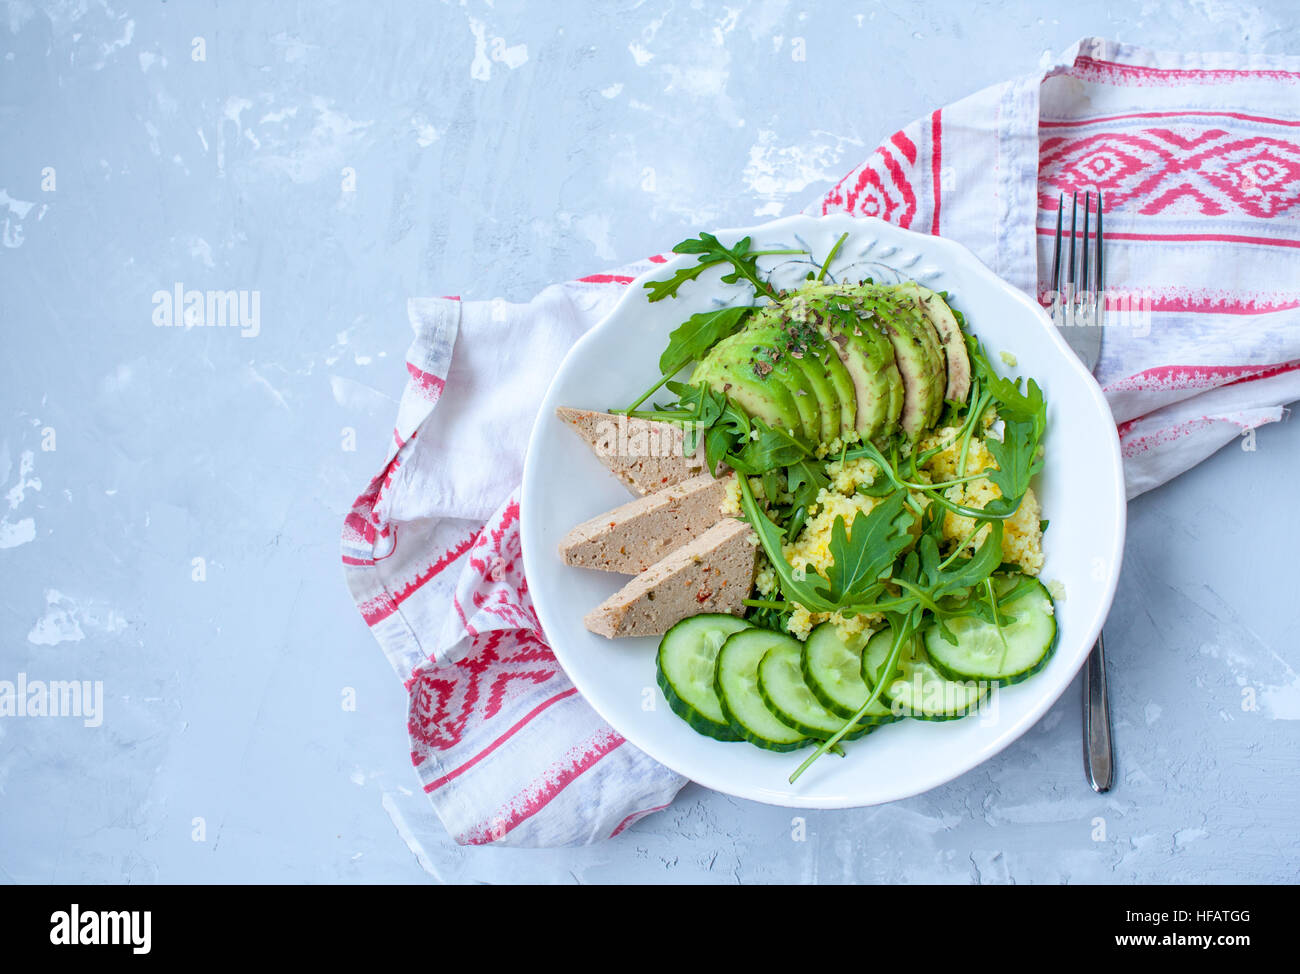 Green salad with avocado, couscous and tofu. Love for a healthy raw food concept. Stock Photo